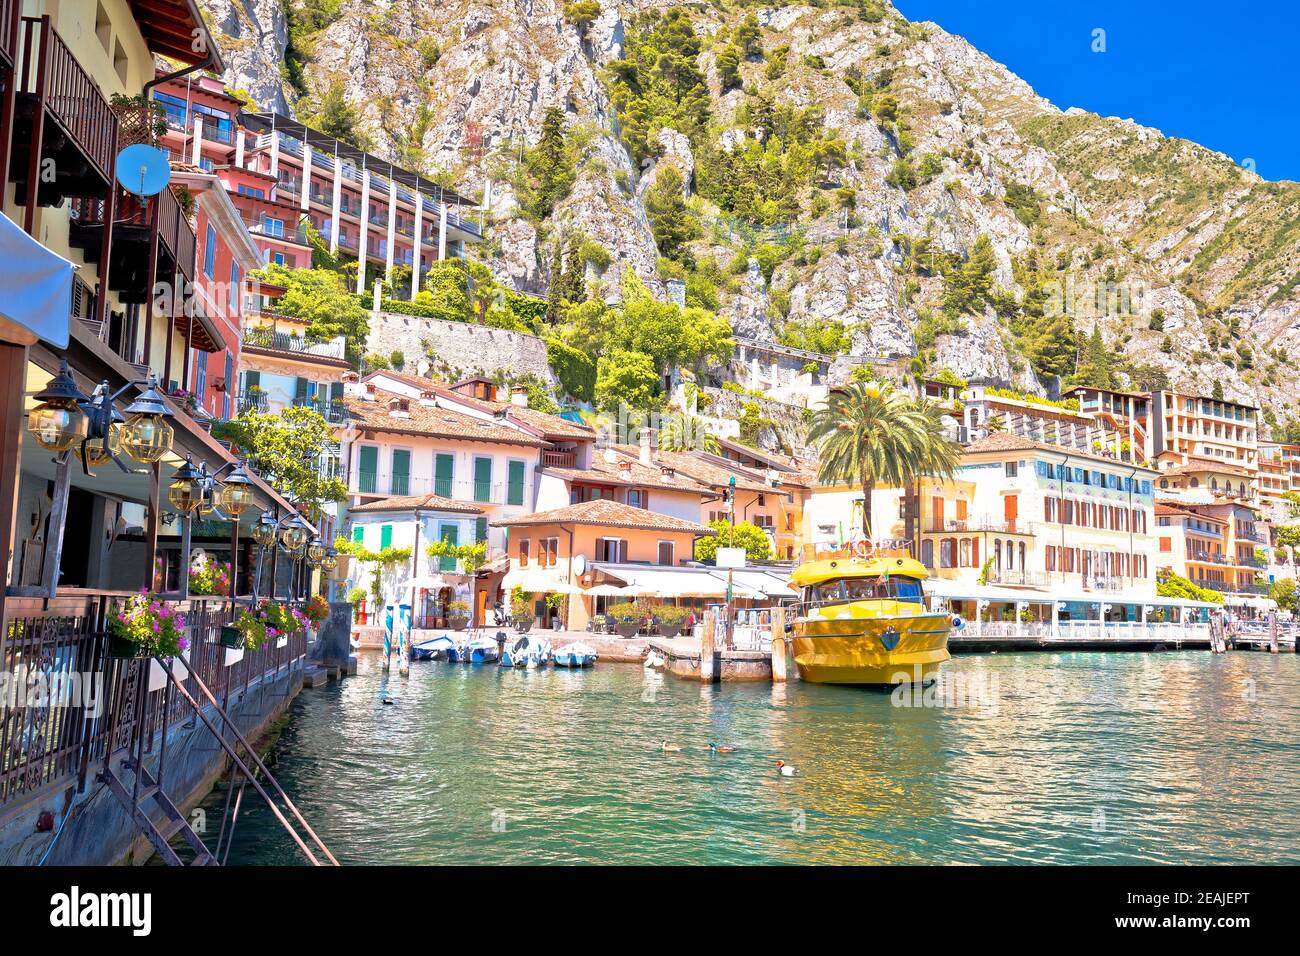 Limone sul Garda turquoise harbor and waterfront view Stock Photo